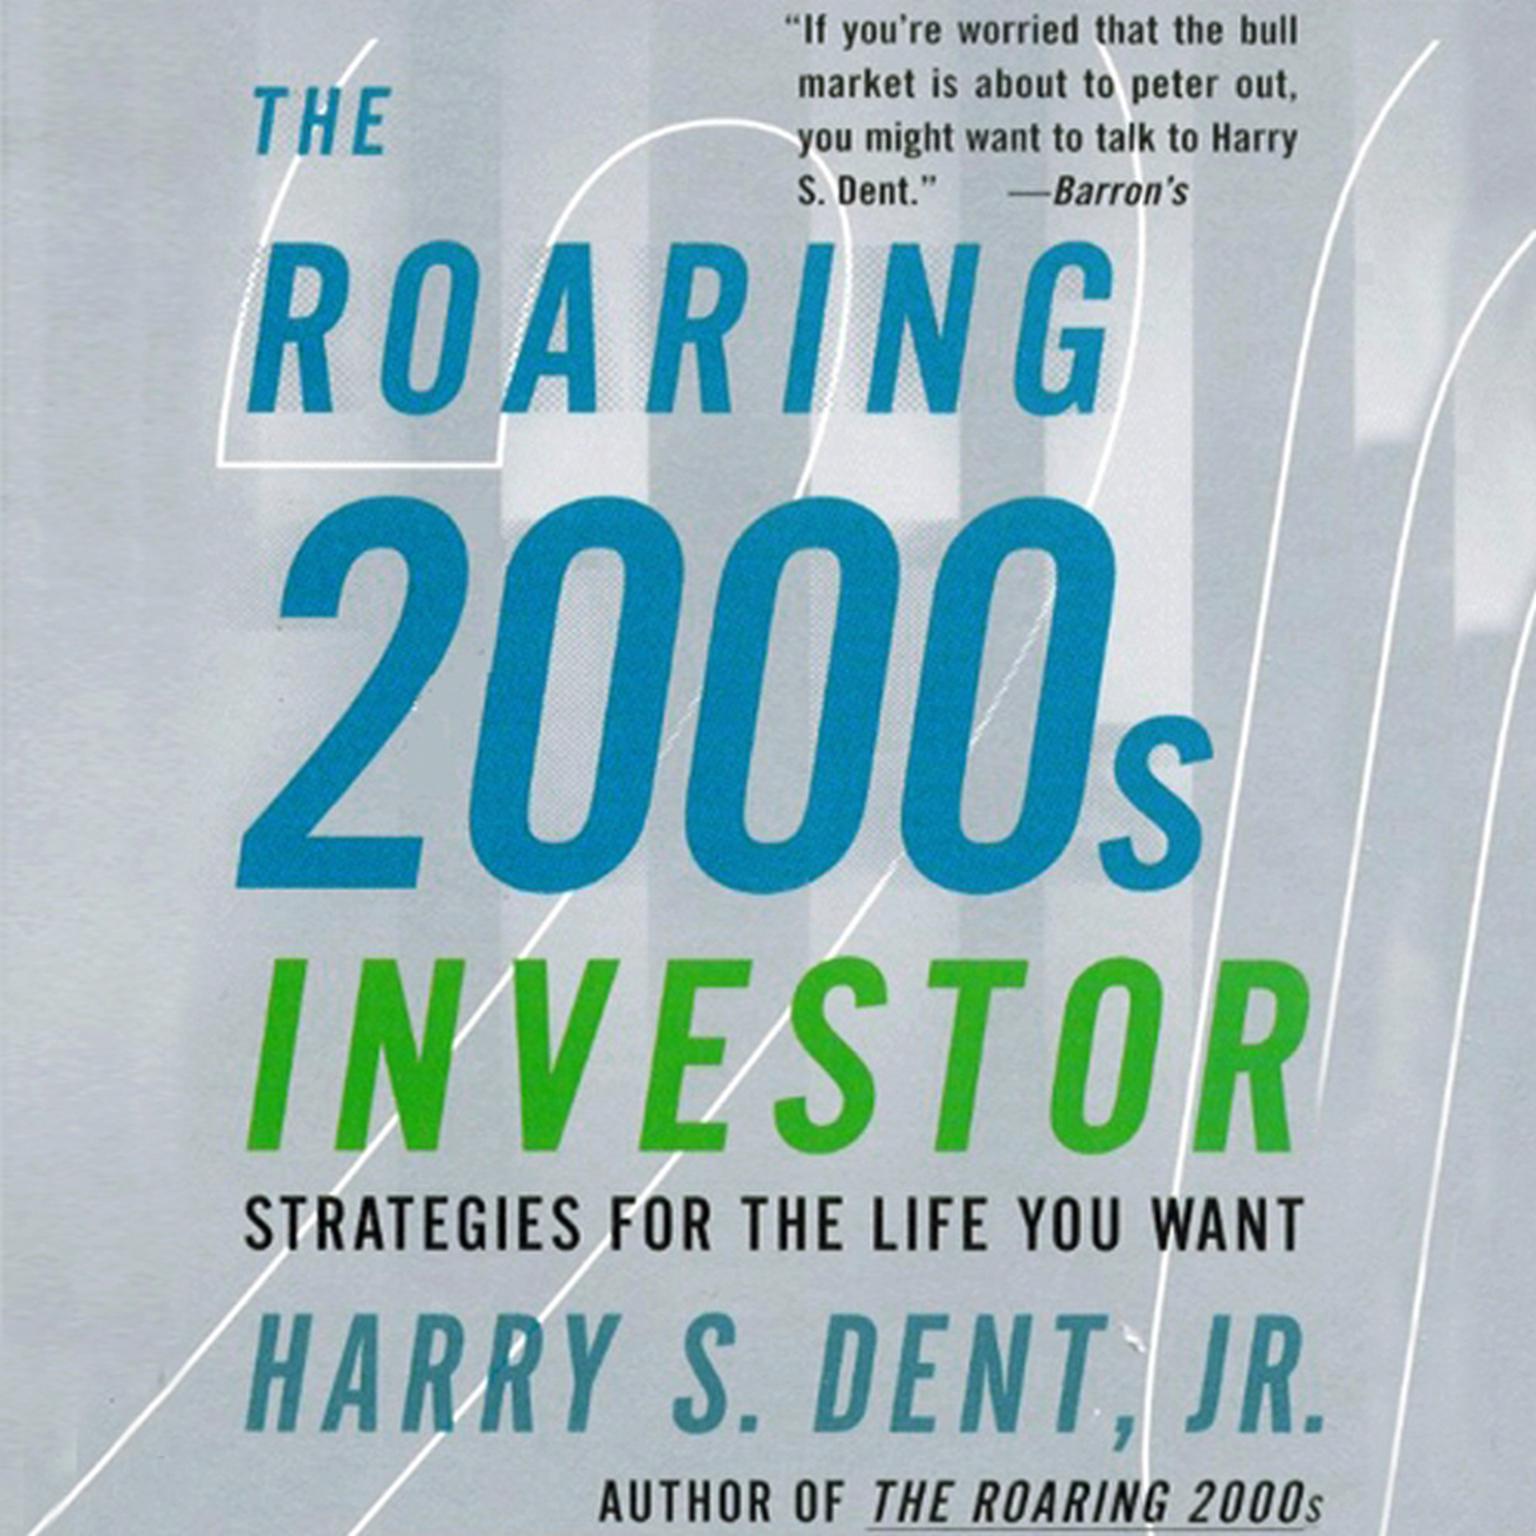 The Roaring 2000s Investor (Abridged): Strategies for the Life You Want Audiobook, by Harry S. Dent